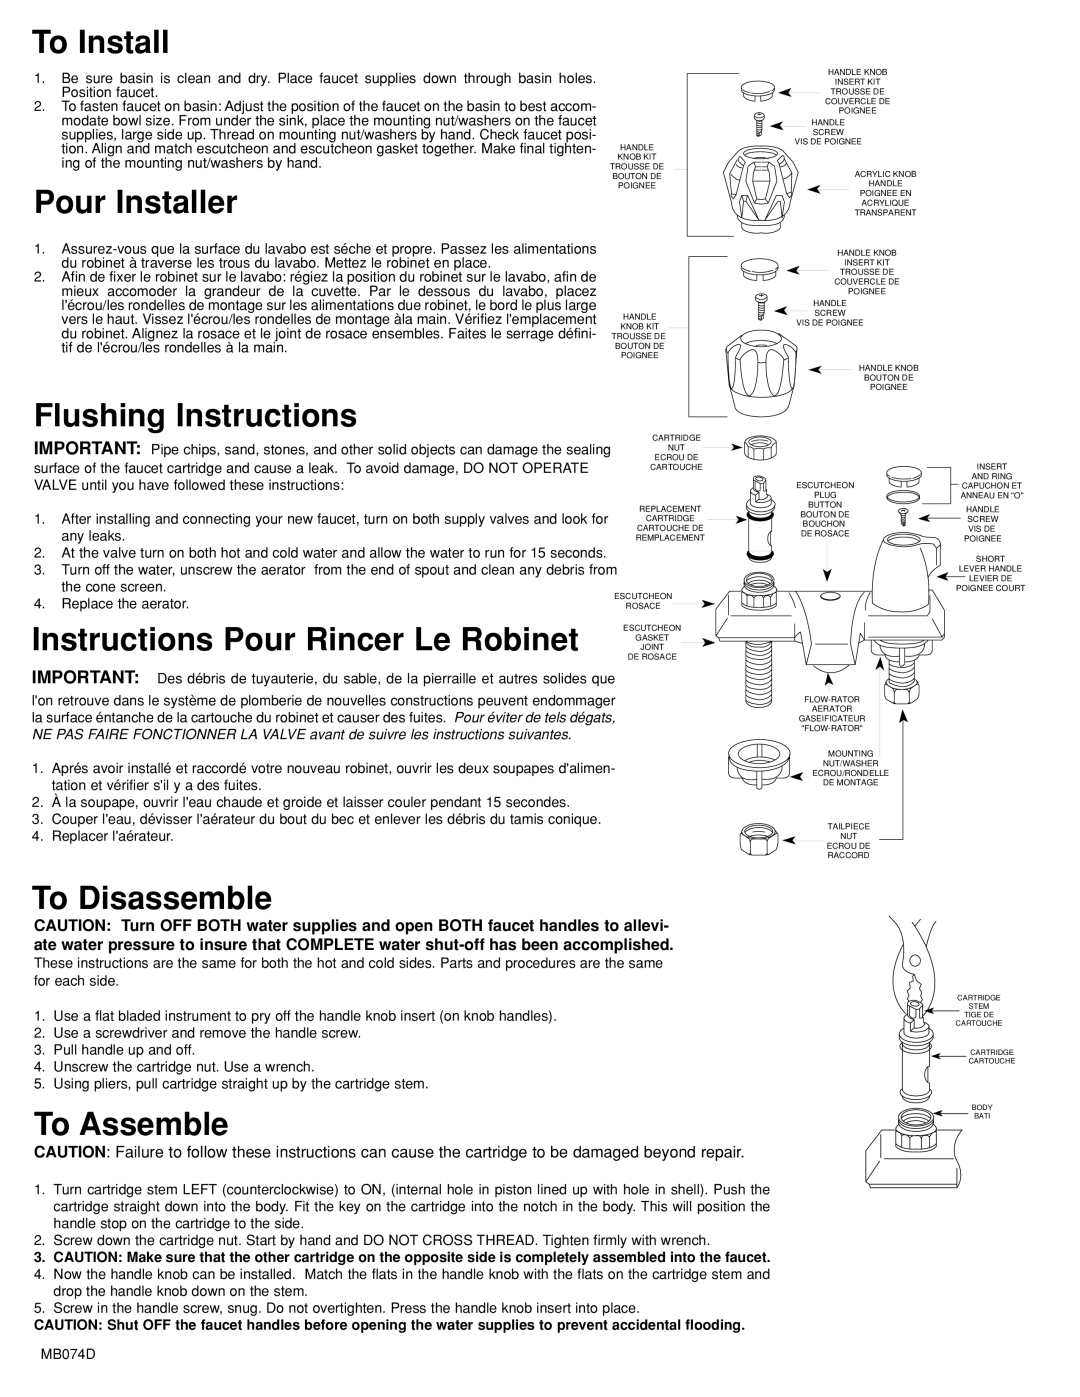 Moen MB074D To Install, Pour Installer, Flushing Instructions, Instructions Pour Rincer Le Robinet GASKET, To Disassemble 